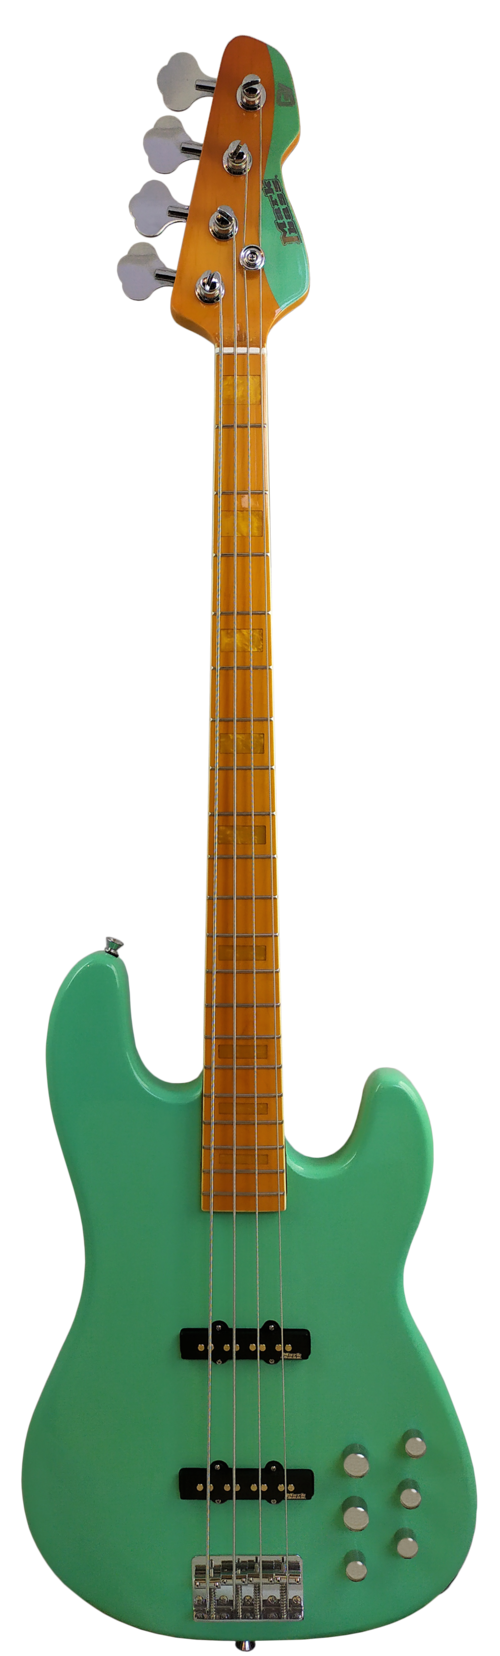 MB GV 4 Gloxy Val Surf Green CR MP - FRONT.png